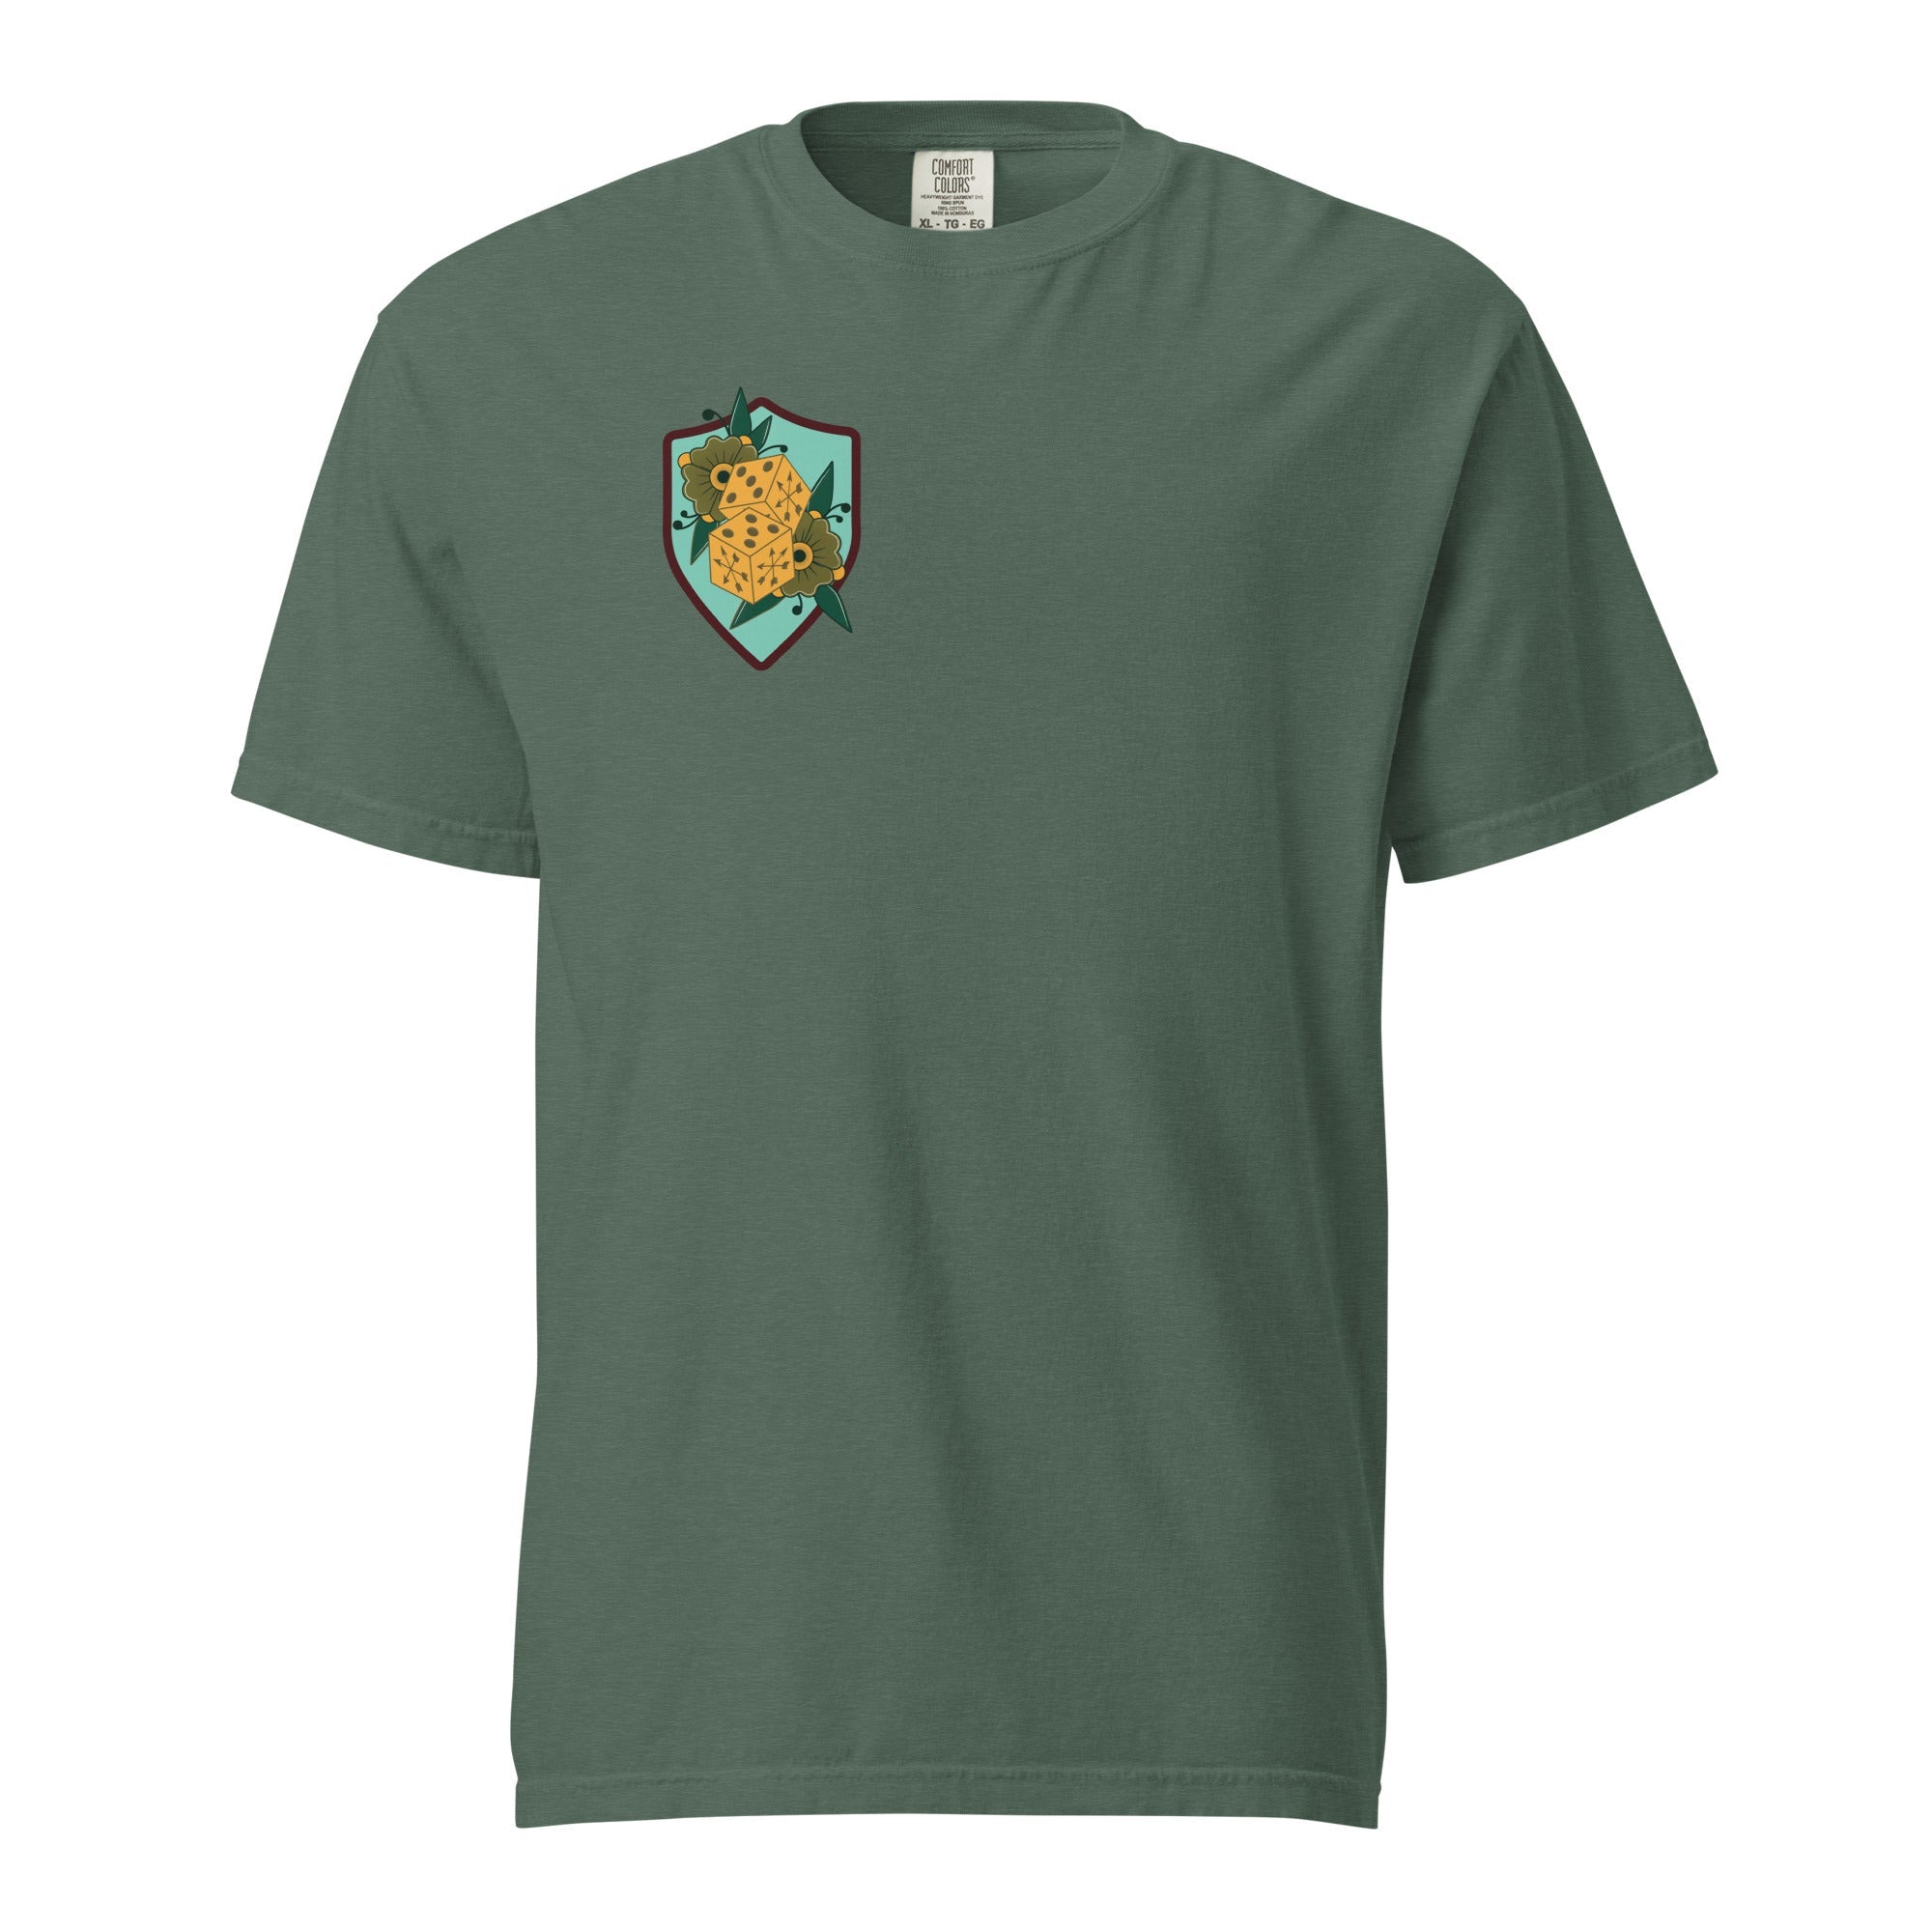 10 Year Anniversary Summer Collection Comfort Colors Tee - Teal - SOARescue